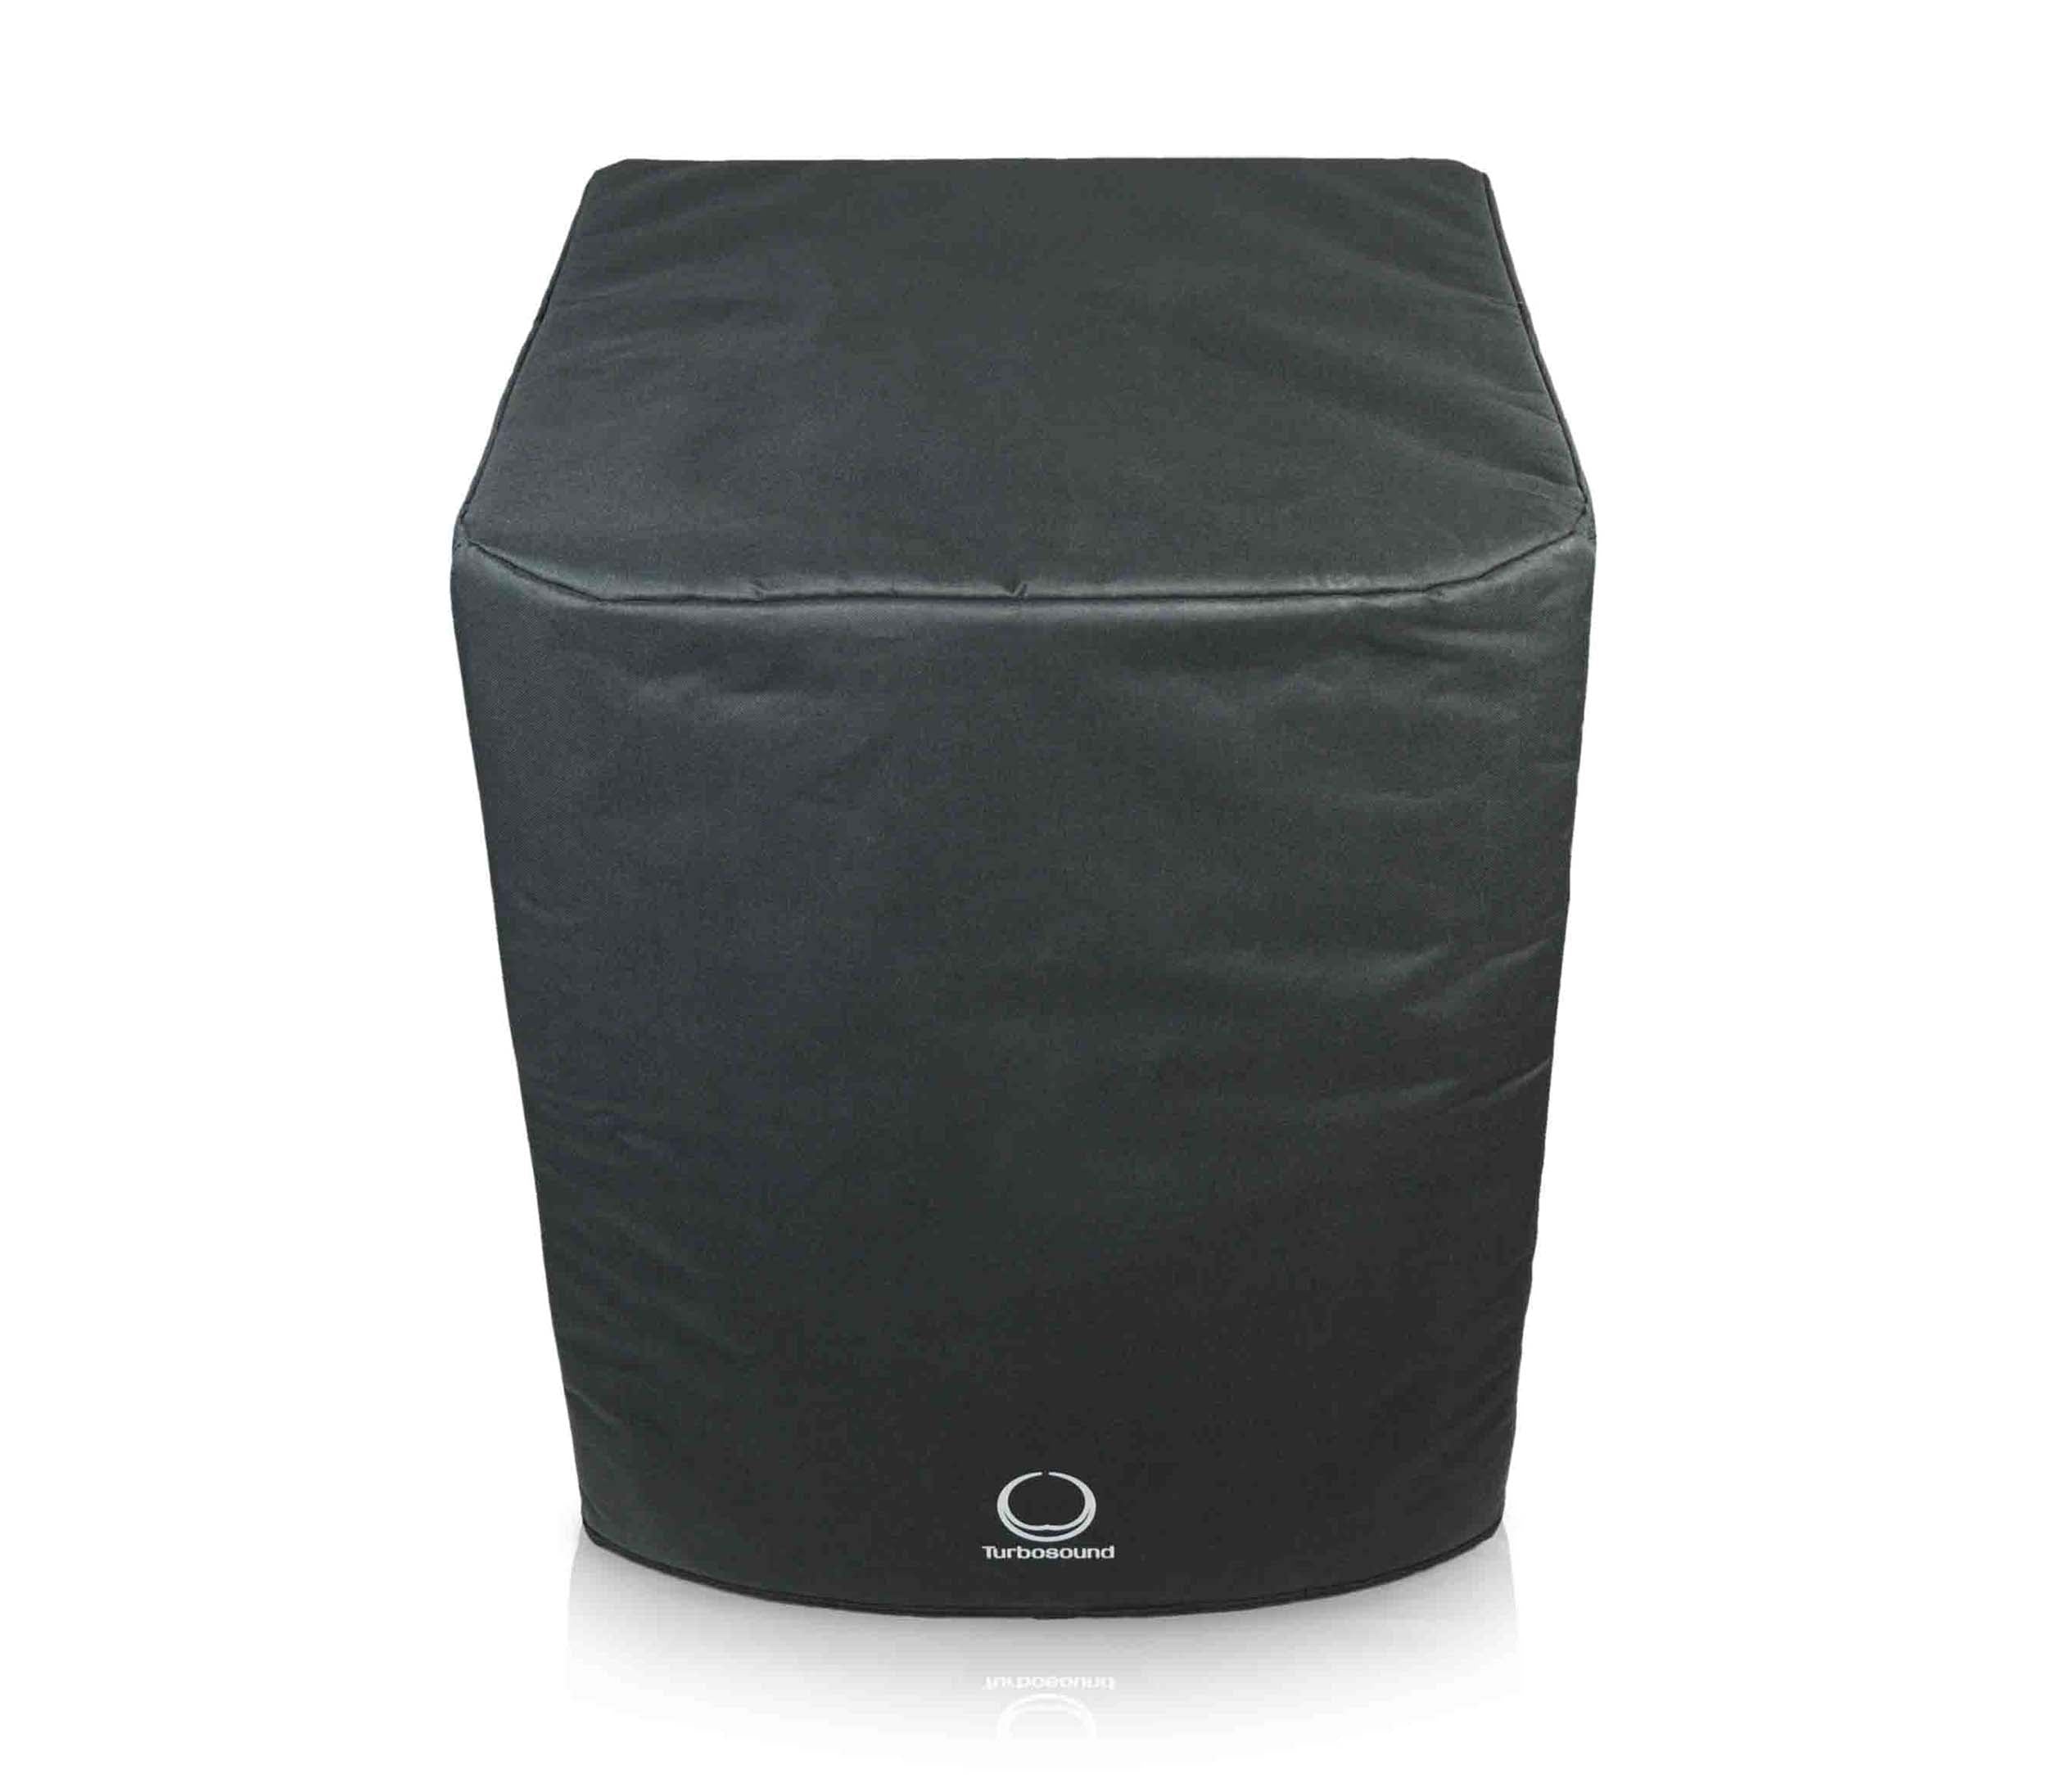 Turbosound TS-PC18B-1, Deluxe Water Resistant Protective Cover for 18" Subwoofers by Turbosound